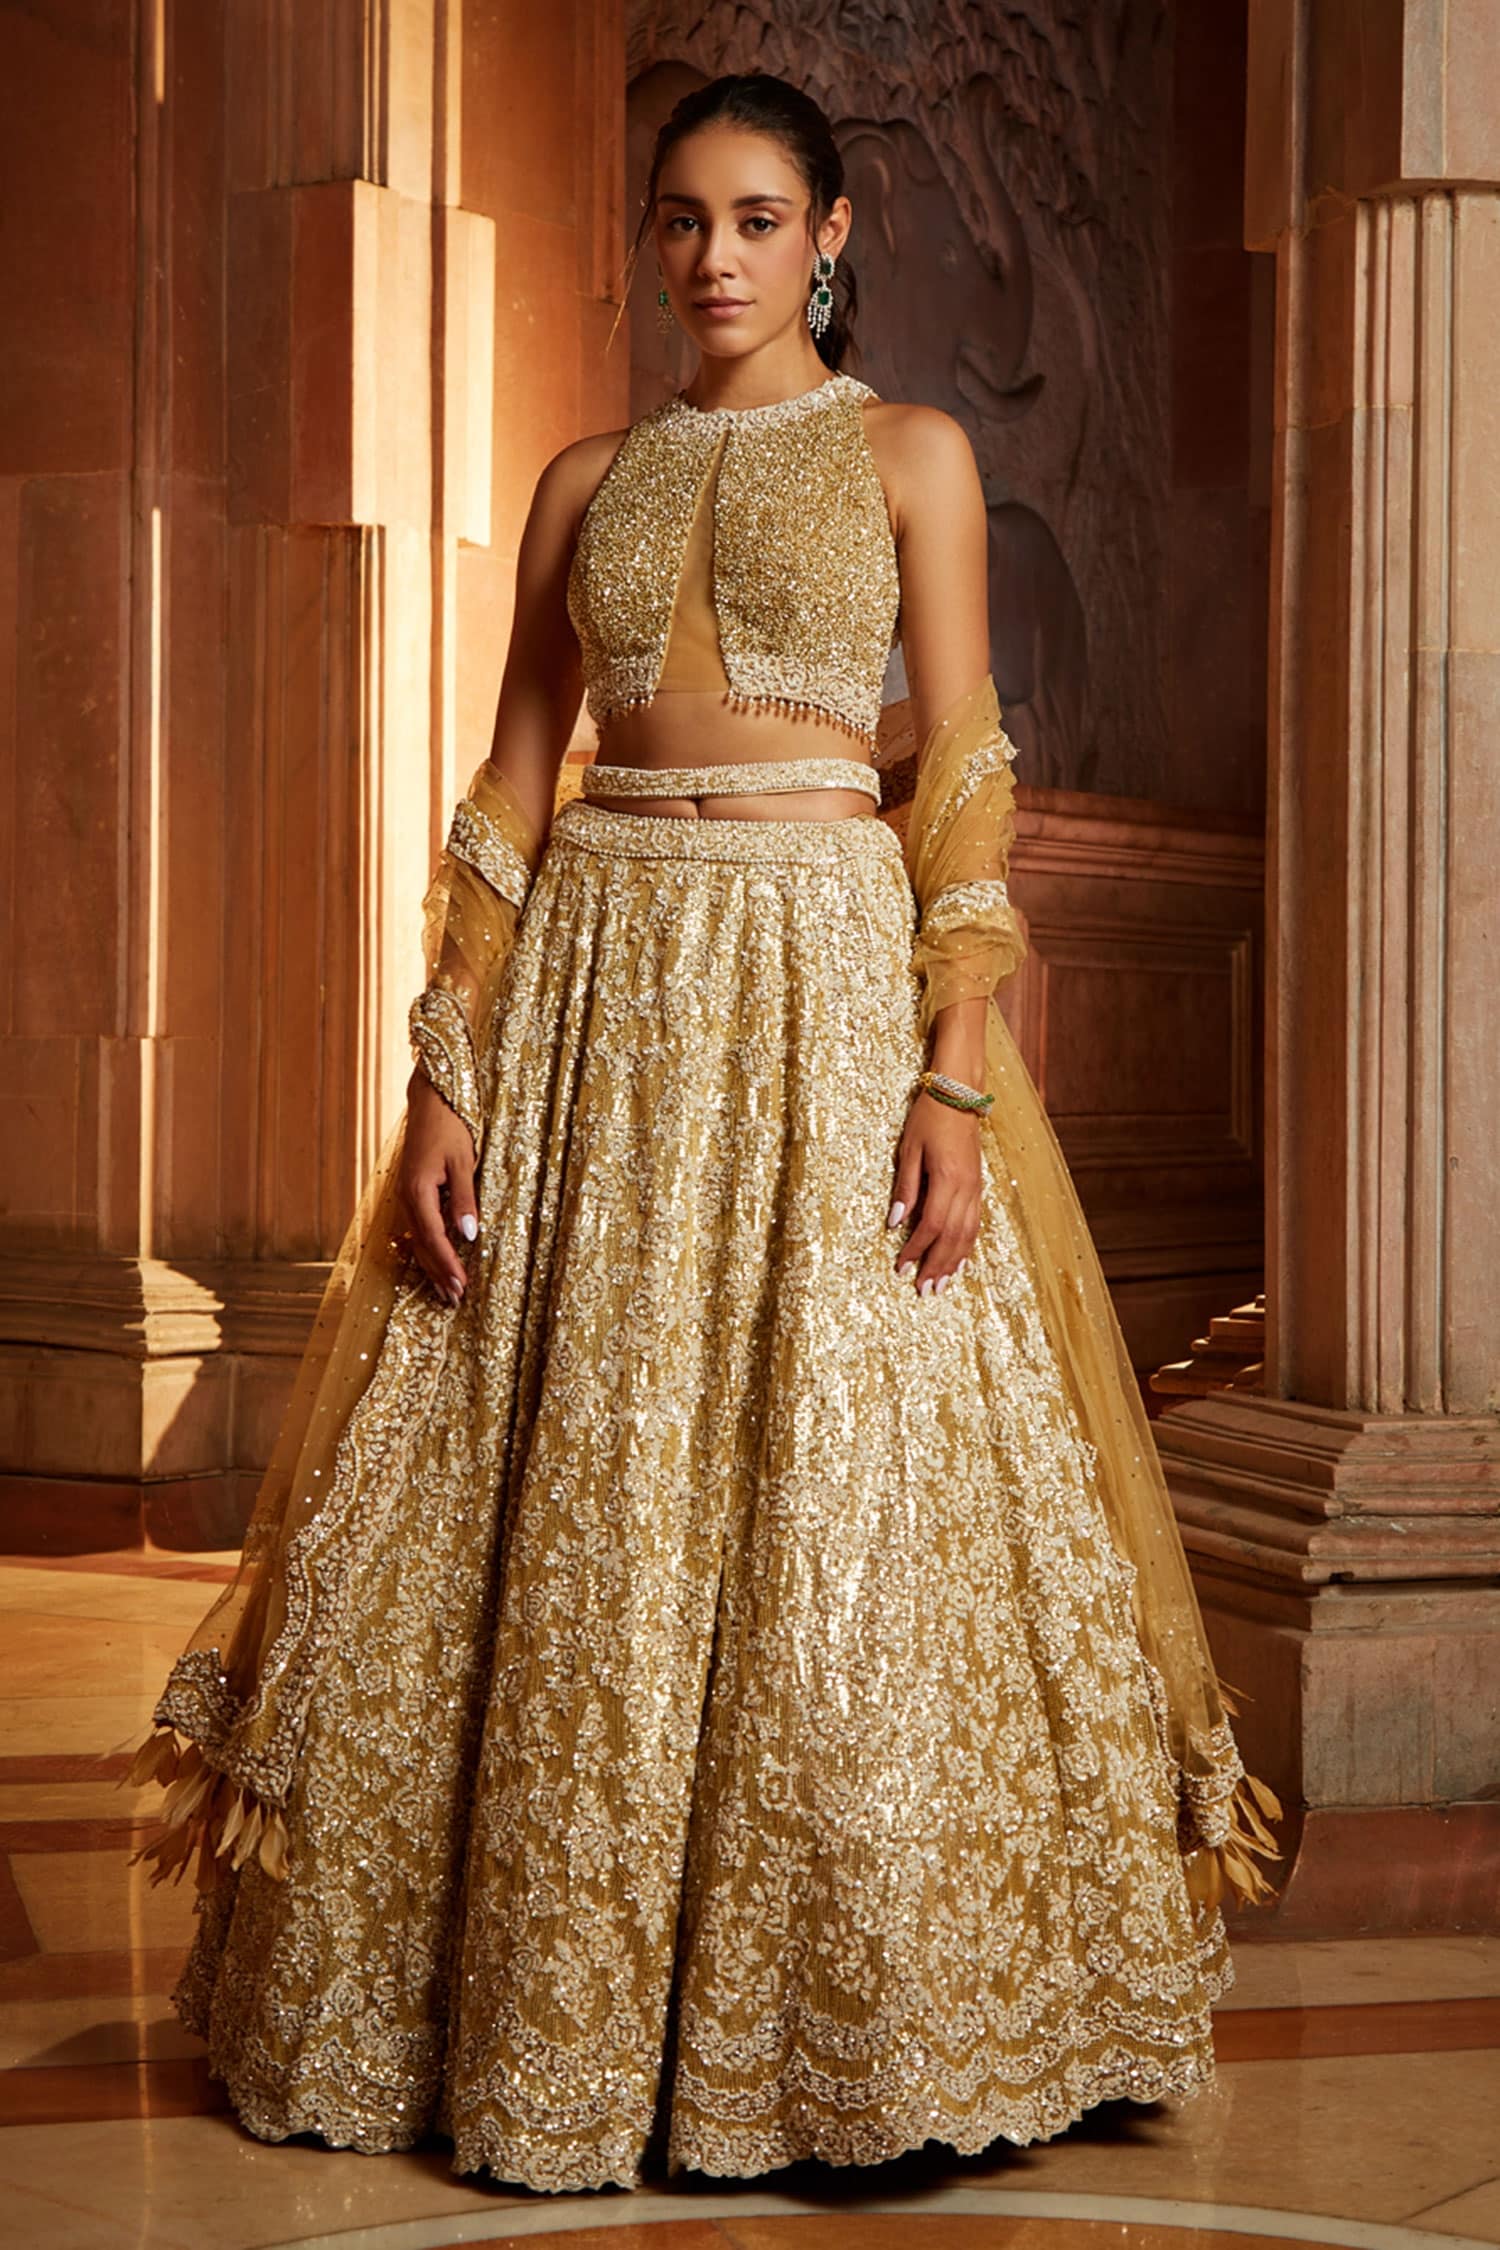 Prettiest Golden Bridal Lehengas for Day Wedding! | Latest bridal lehenga  designs, Latest bridal lehenga, Bridal outfits